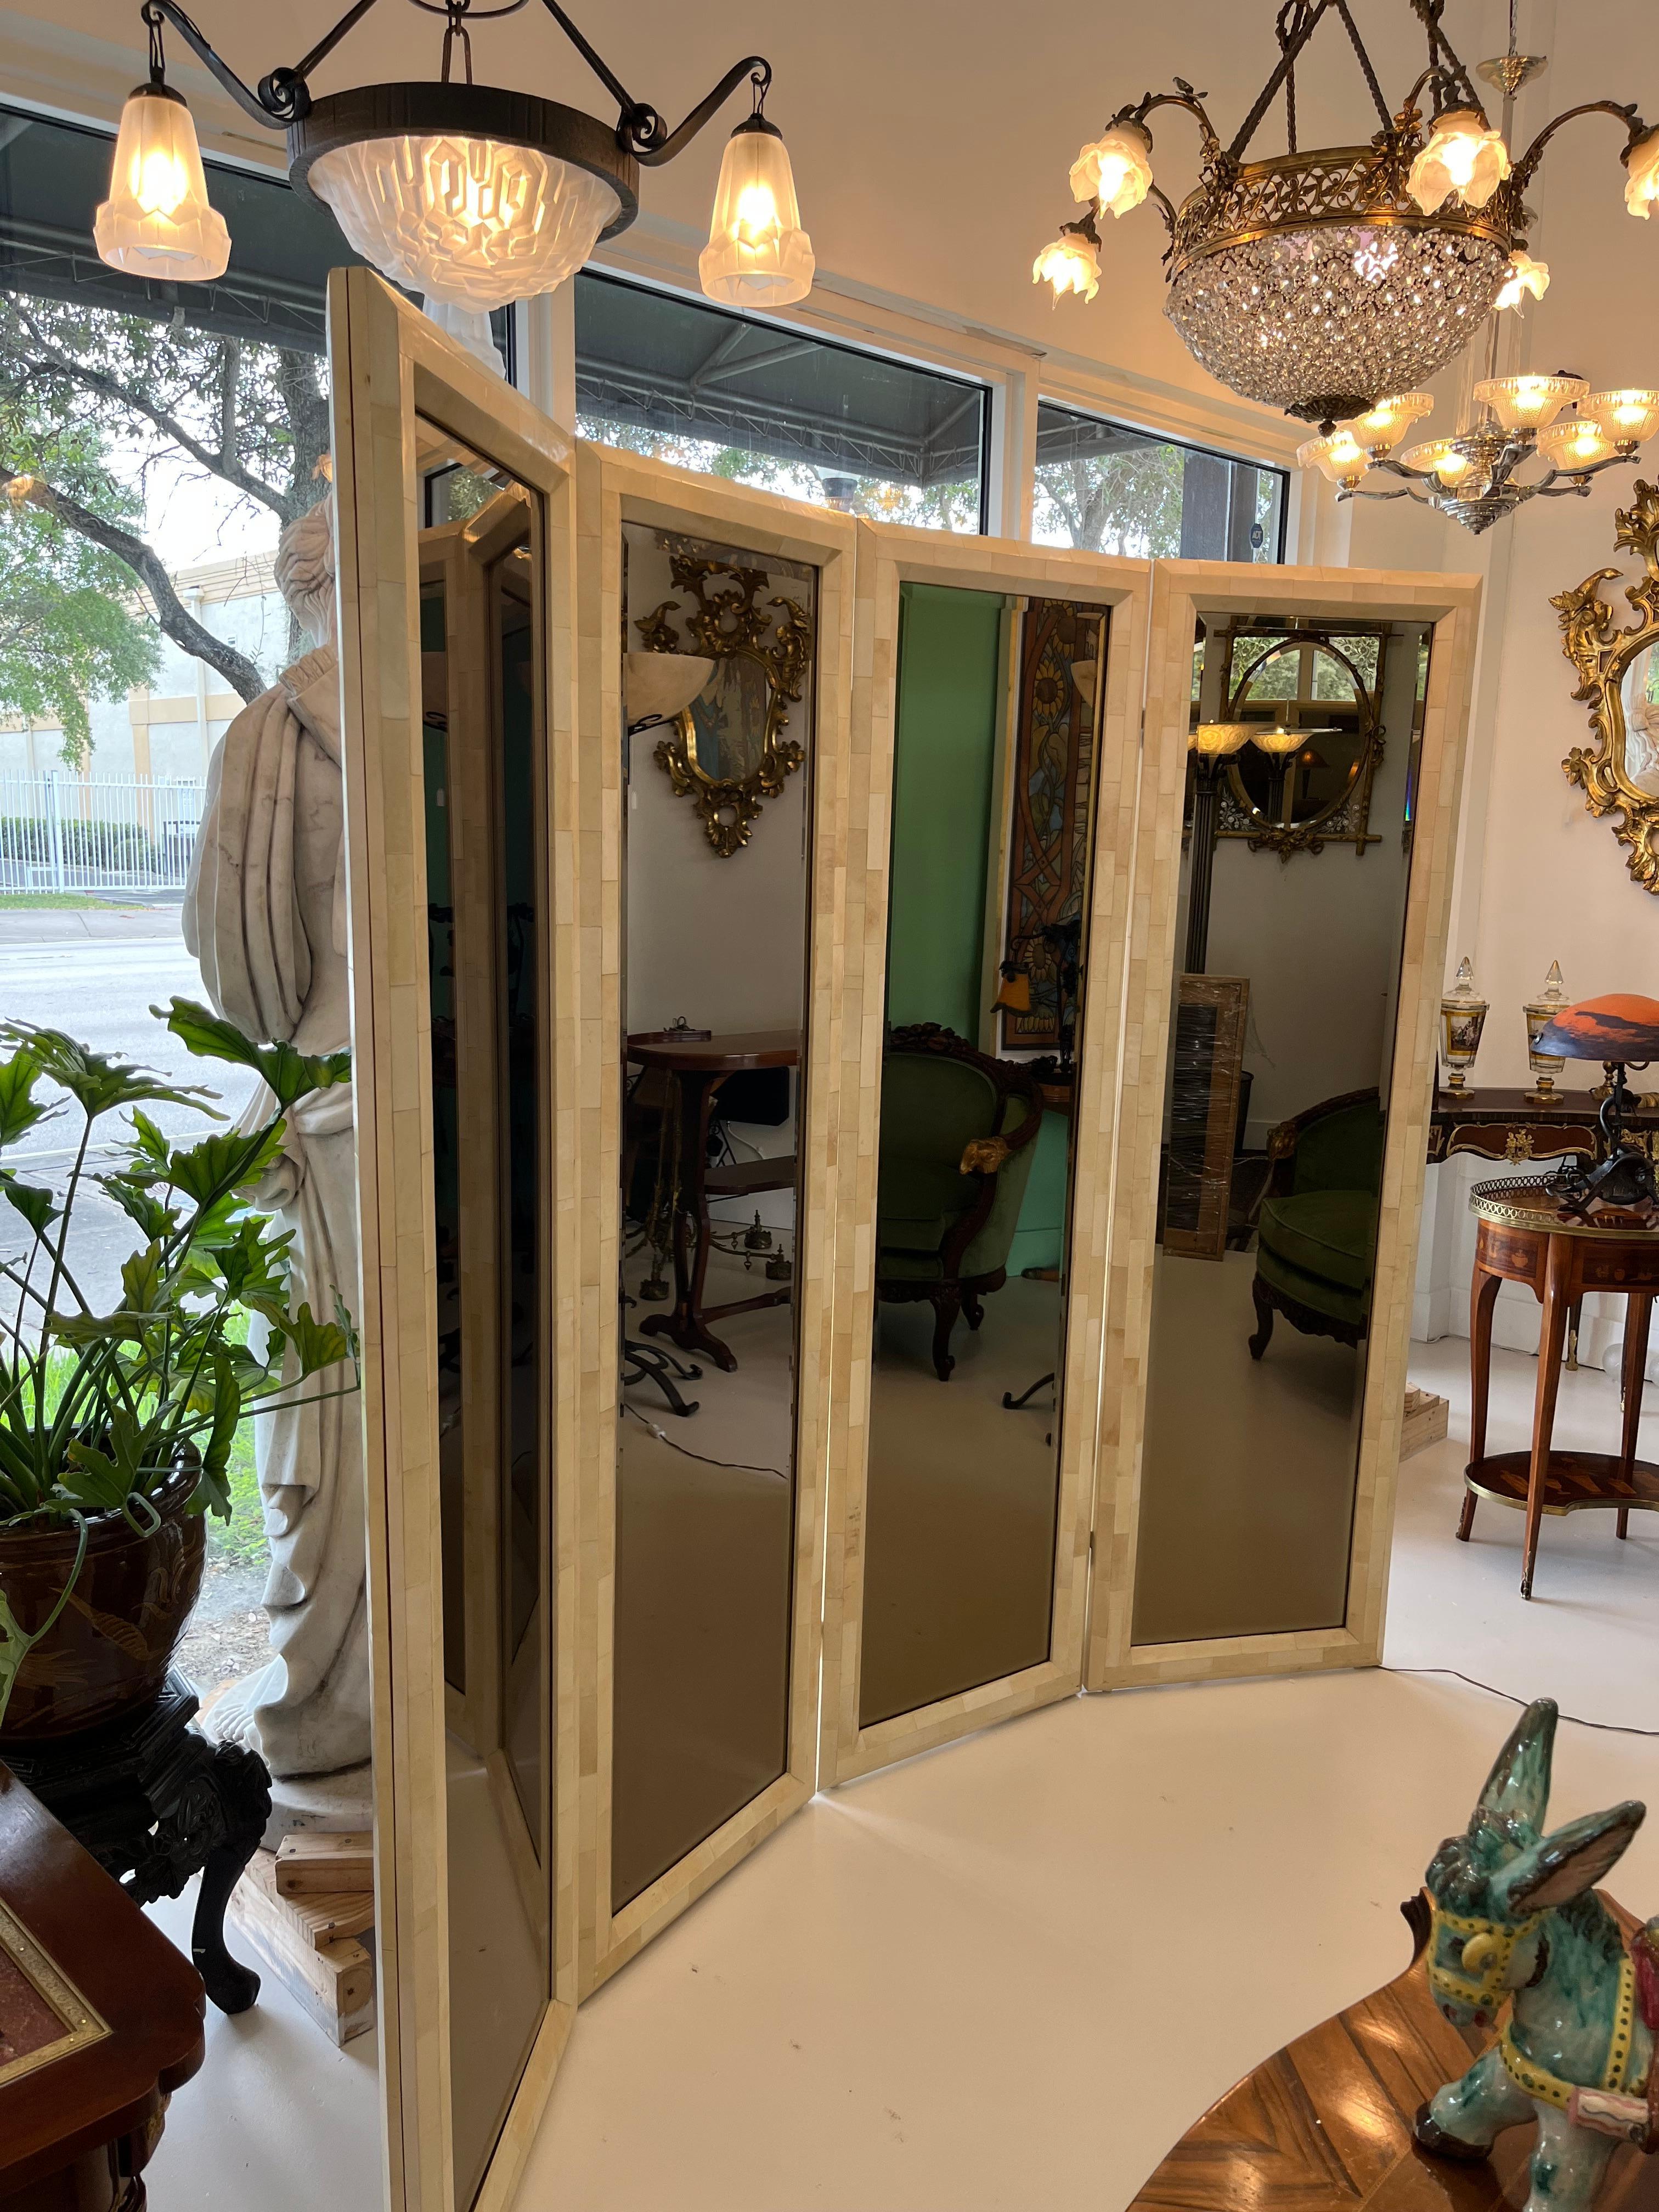 Really amazing Mirrored room divider attribute to Karl Springer with 4 panels with Goatskin parchment and its original beveled mirrors , one side regular mirrors and the other side mercury treatment mirrors giving to this piece an incredible touch